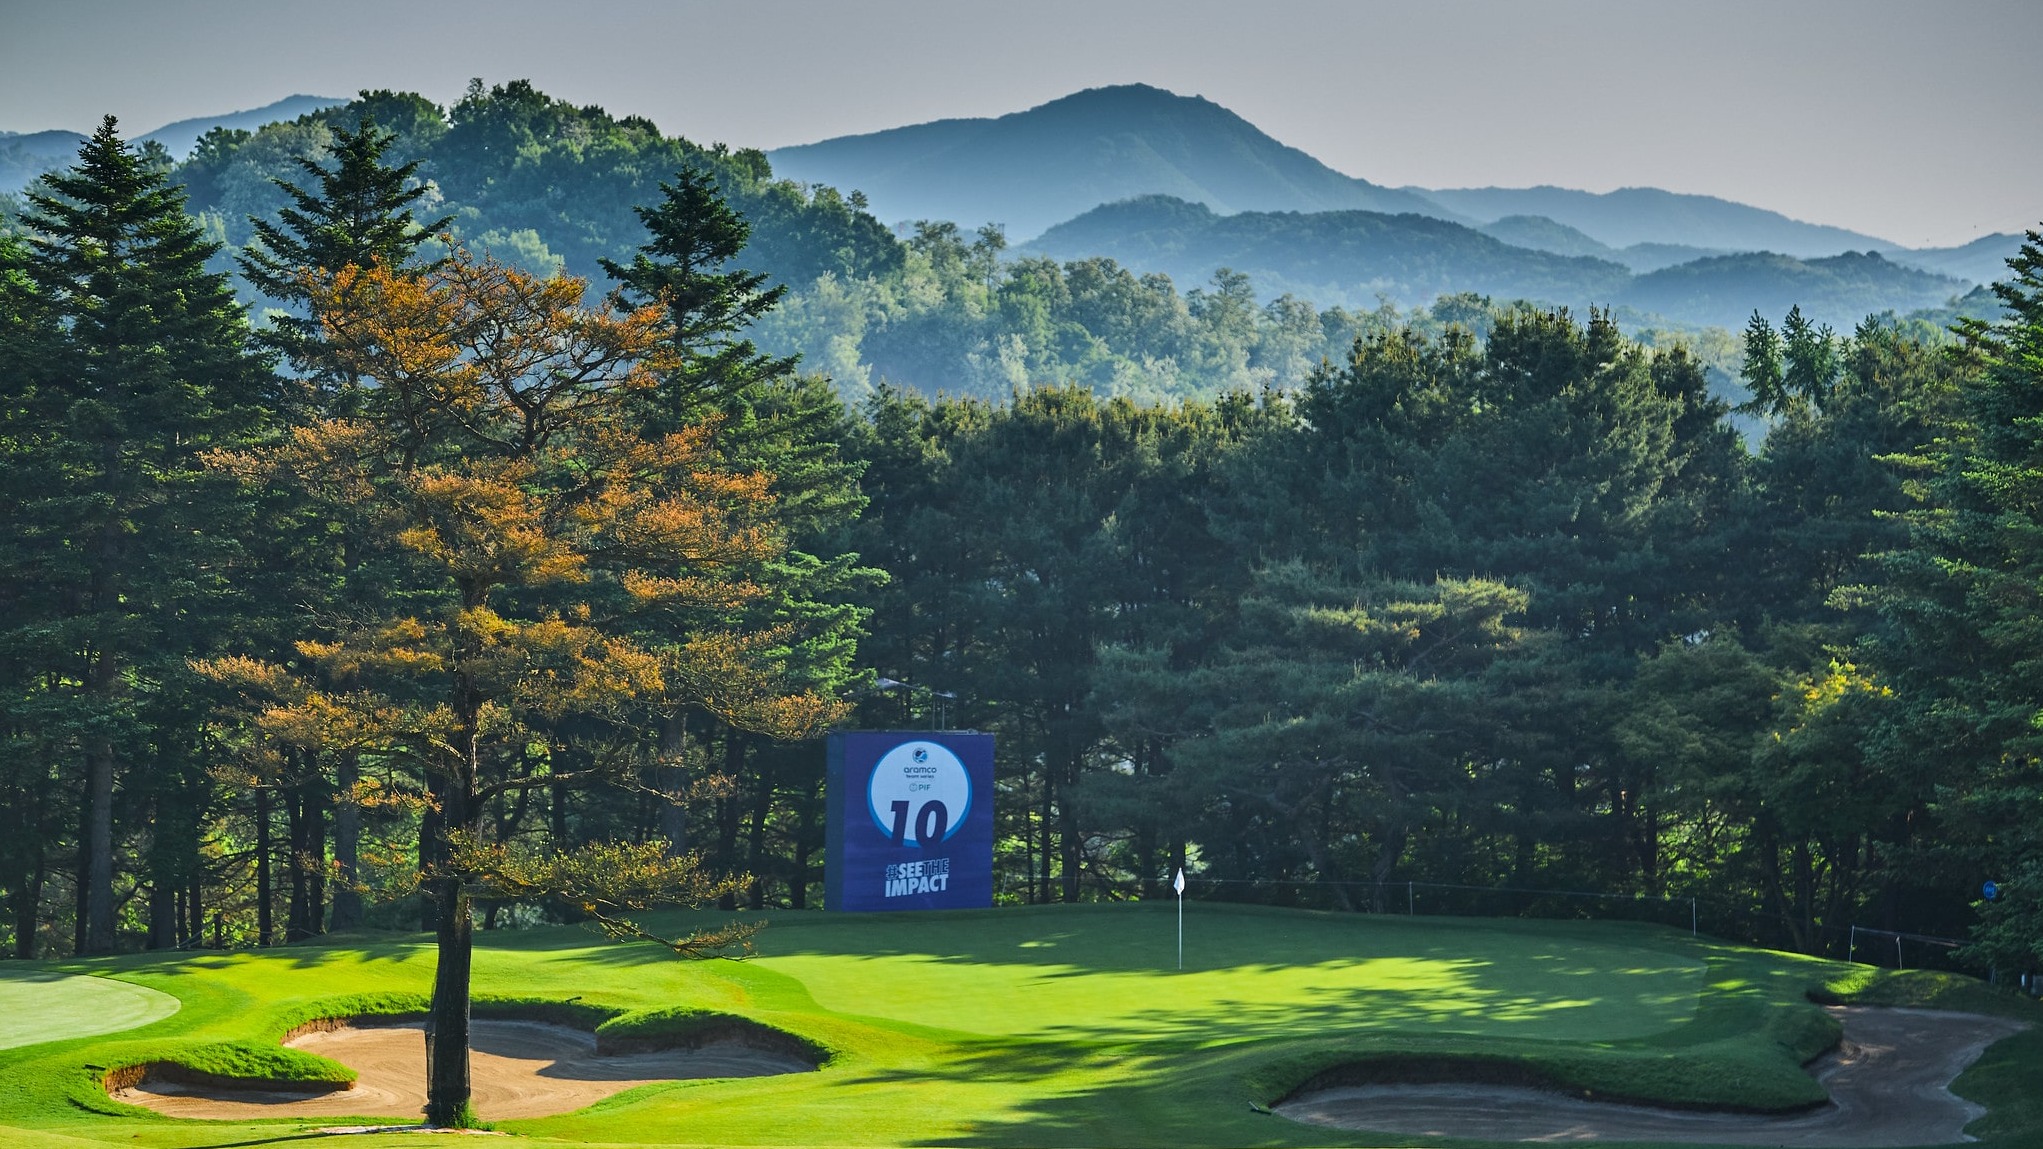 The 10th hole at New Korea Country Club